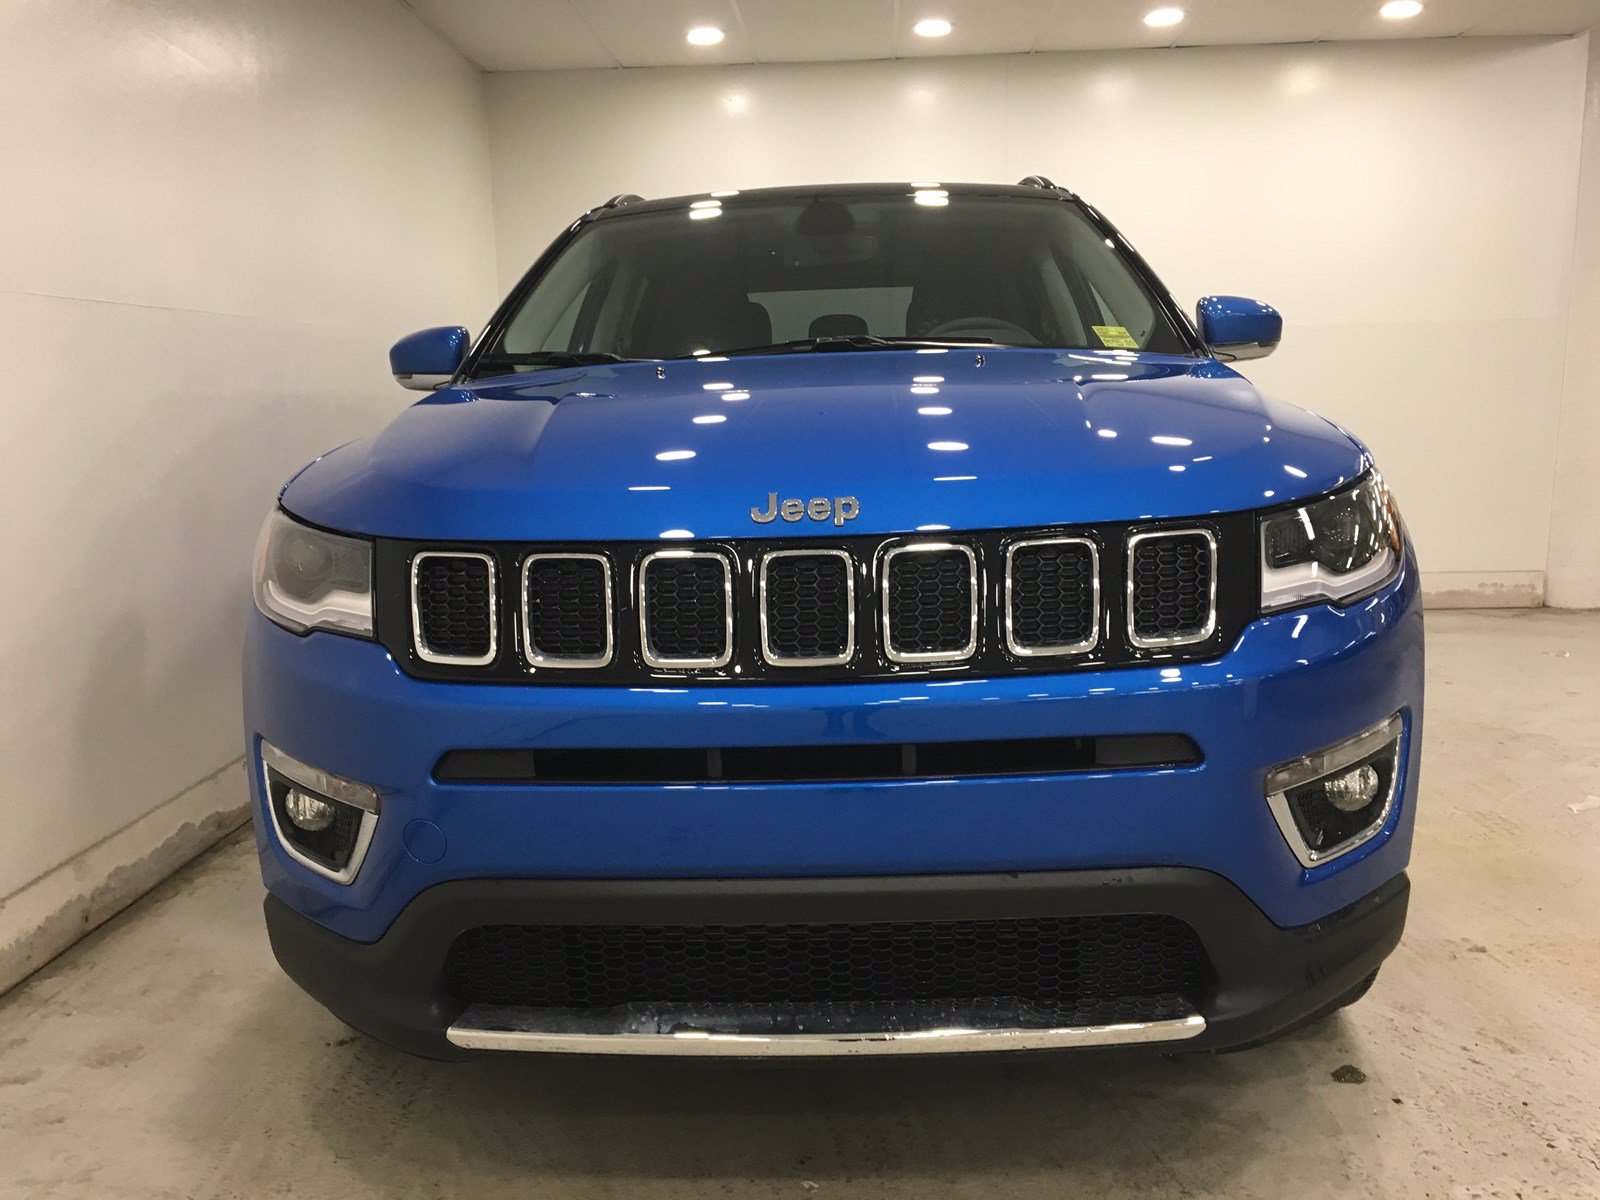 58 HQ Images Jeep Compass Sport 2020 Near Me : New 2020 Jeep Compass Sport 4x4 | Heated Seats and ...